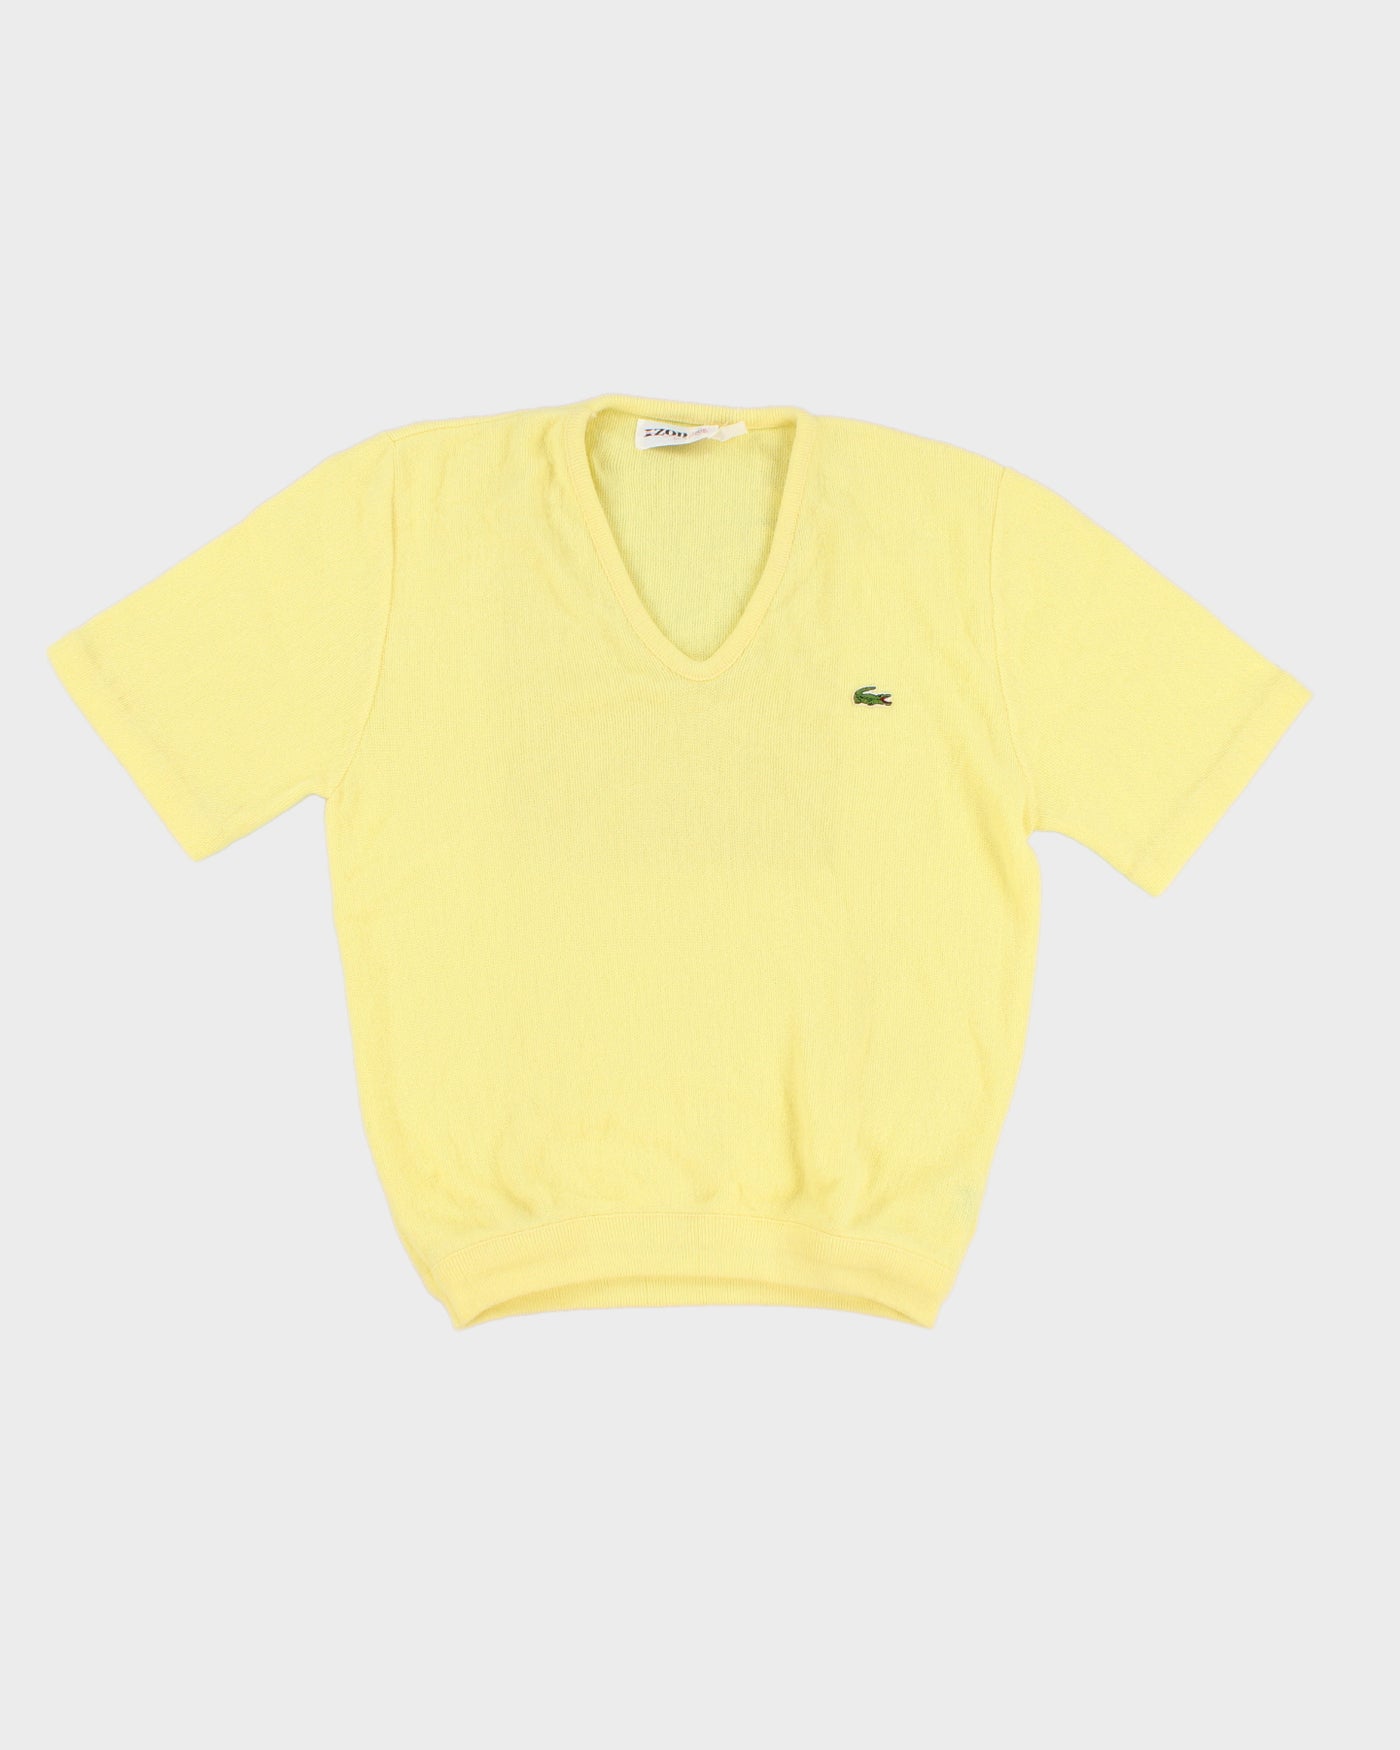 Vintage 70s IZOD Lacoste Yellow Knit Short Sleeve Top - M/L